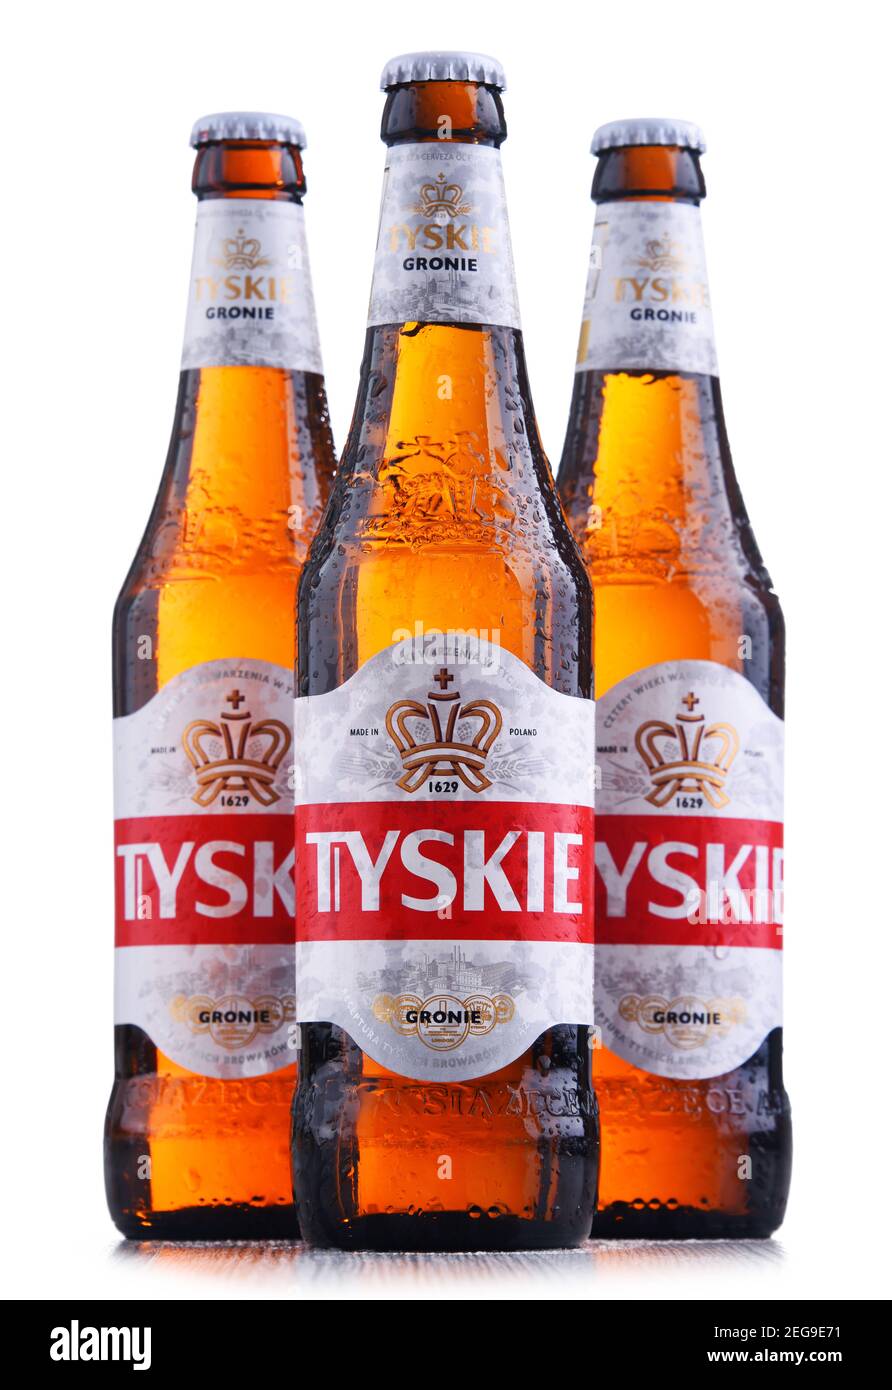 POZNAN, POL - OCT 8, 2020: Bottles of Tyskie, best selling brand of beer in Poland, produced by Kompania Piwowarska, a subsidiary of  Asahi Breweries Stock Photo